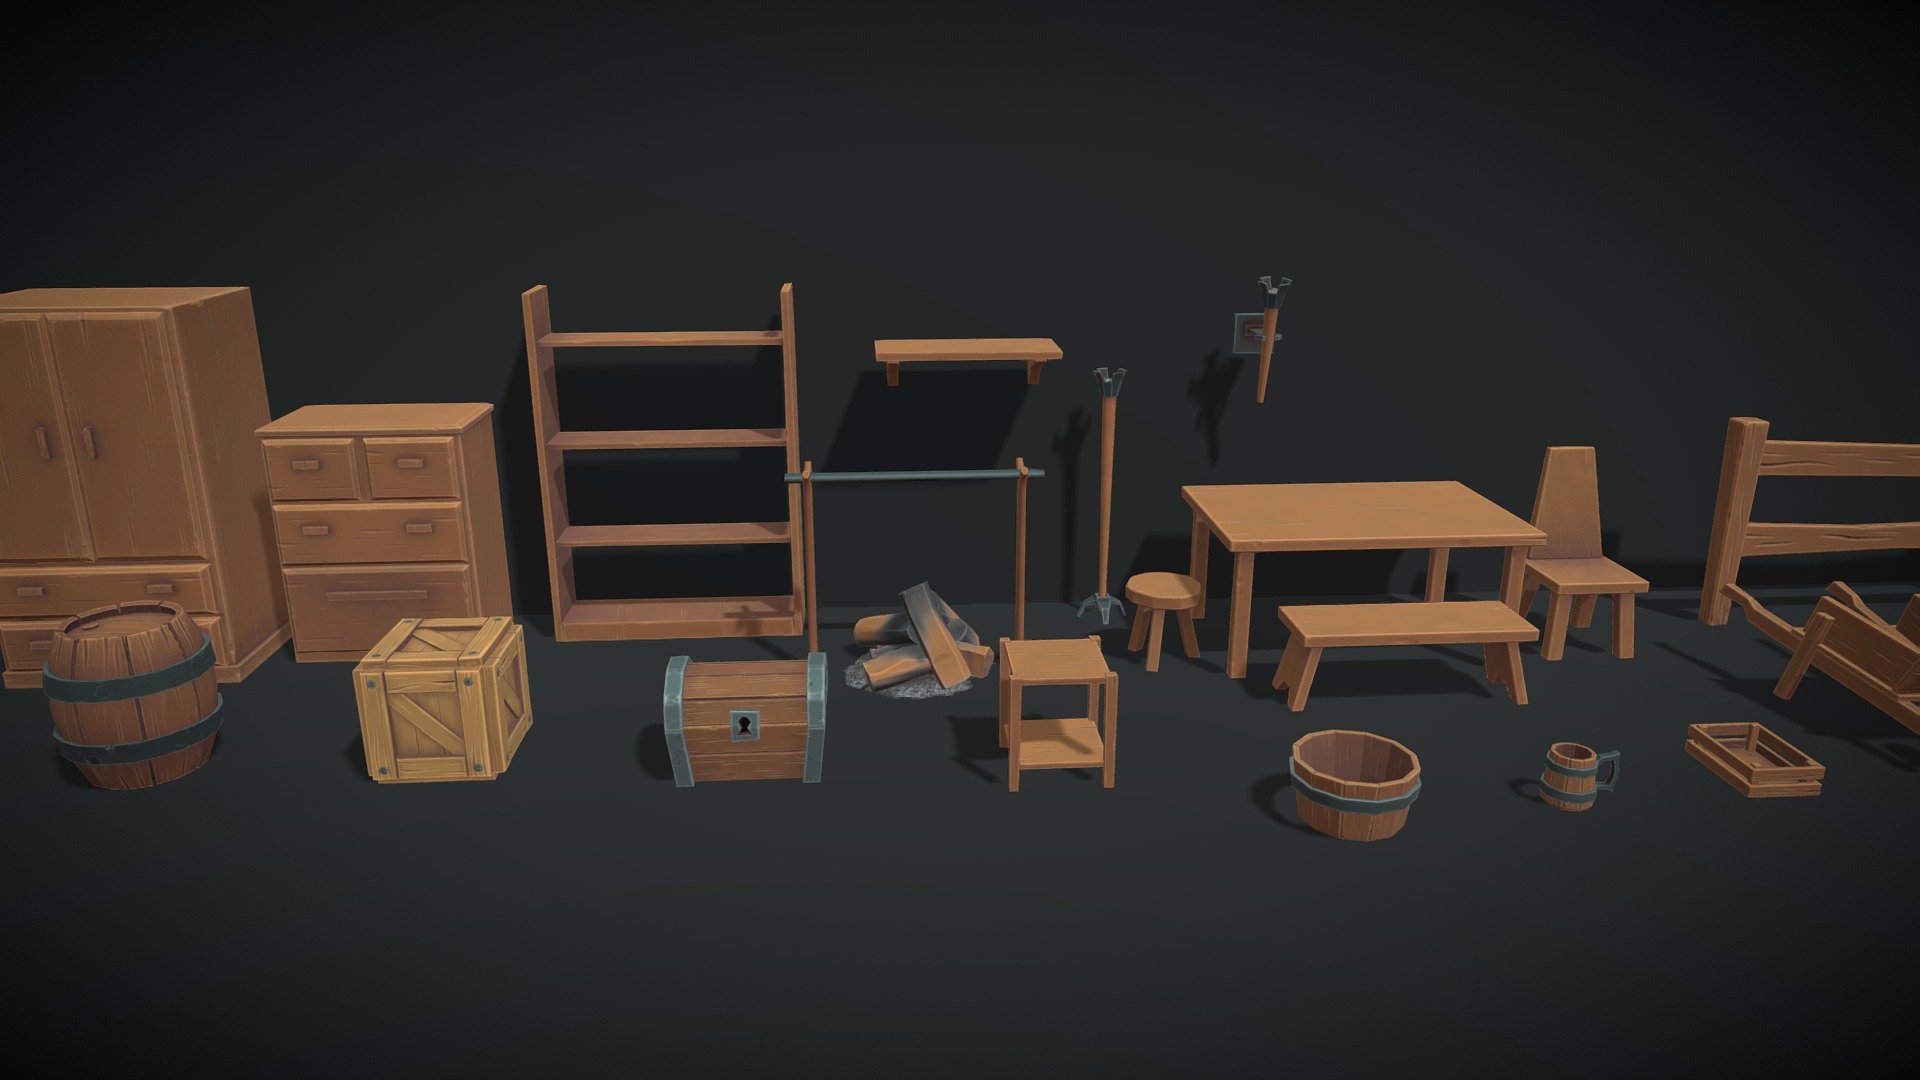 Easy to use, game ready stylized props.

A stylized set of 23 Wooden props for any kind of game.

The props are well separated into parts to allow the users to customize/animate if necessary.

Props: - Crate - Barrel - Treasure Chest - Table - Chair - Stool - Bench - Chest of Drawers - Wardrobe - Wheelbarrow - Mug - Bucket - Tray - Campfire - Wall Torch - Floor Torch - Shelf 1 - Shelf 2 - Shelf 3 - Fence 1 - Fence 2 - Fence 3 - Fence Door

The geometry has a good topology and triangulated faces to avoid possible Normal map problems on the textures.

There is a 4K Base Color, Normal, Metallic and Roughness map for each prop.

We recomend the use of Autodesk interactive shader mode to apply textures to materials.

Each prop has 3 color variations and some of them share textures with others.

Example: The “Furniture textures” apply on the Chest of drawers and also the Wardrobe.

Note: One of the models (WoodFence3), also has extra normal map detail, for each color variation 3d model